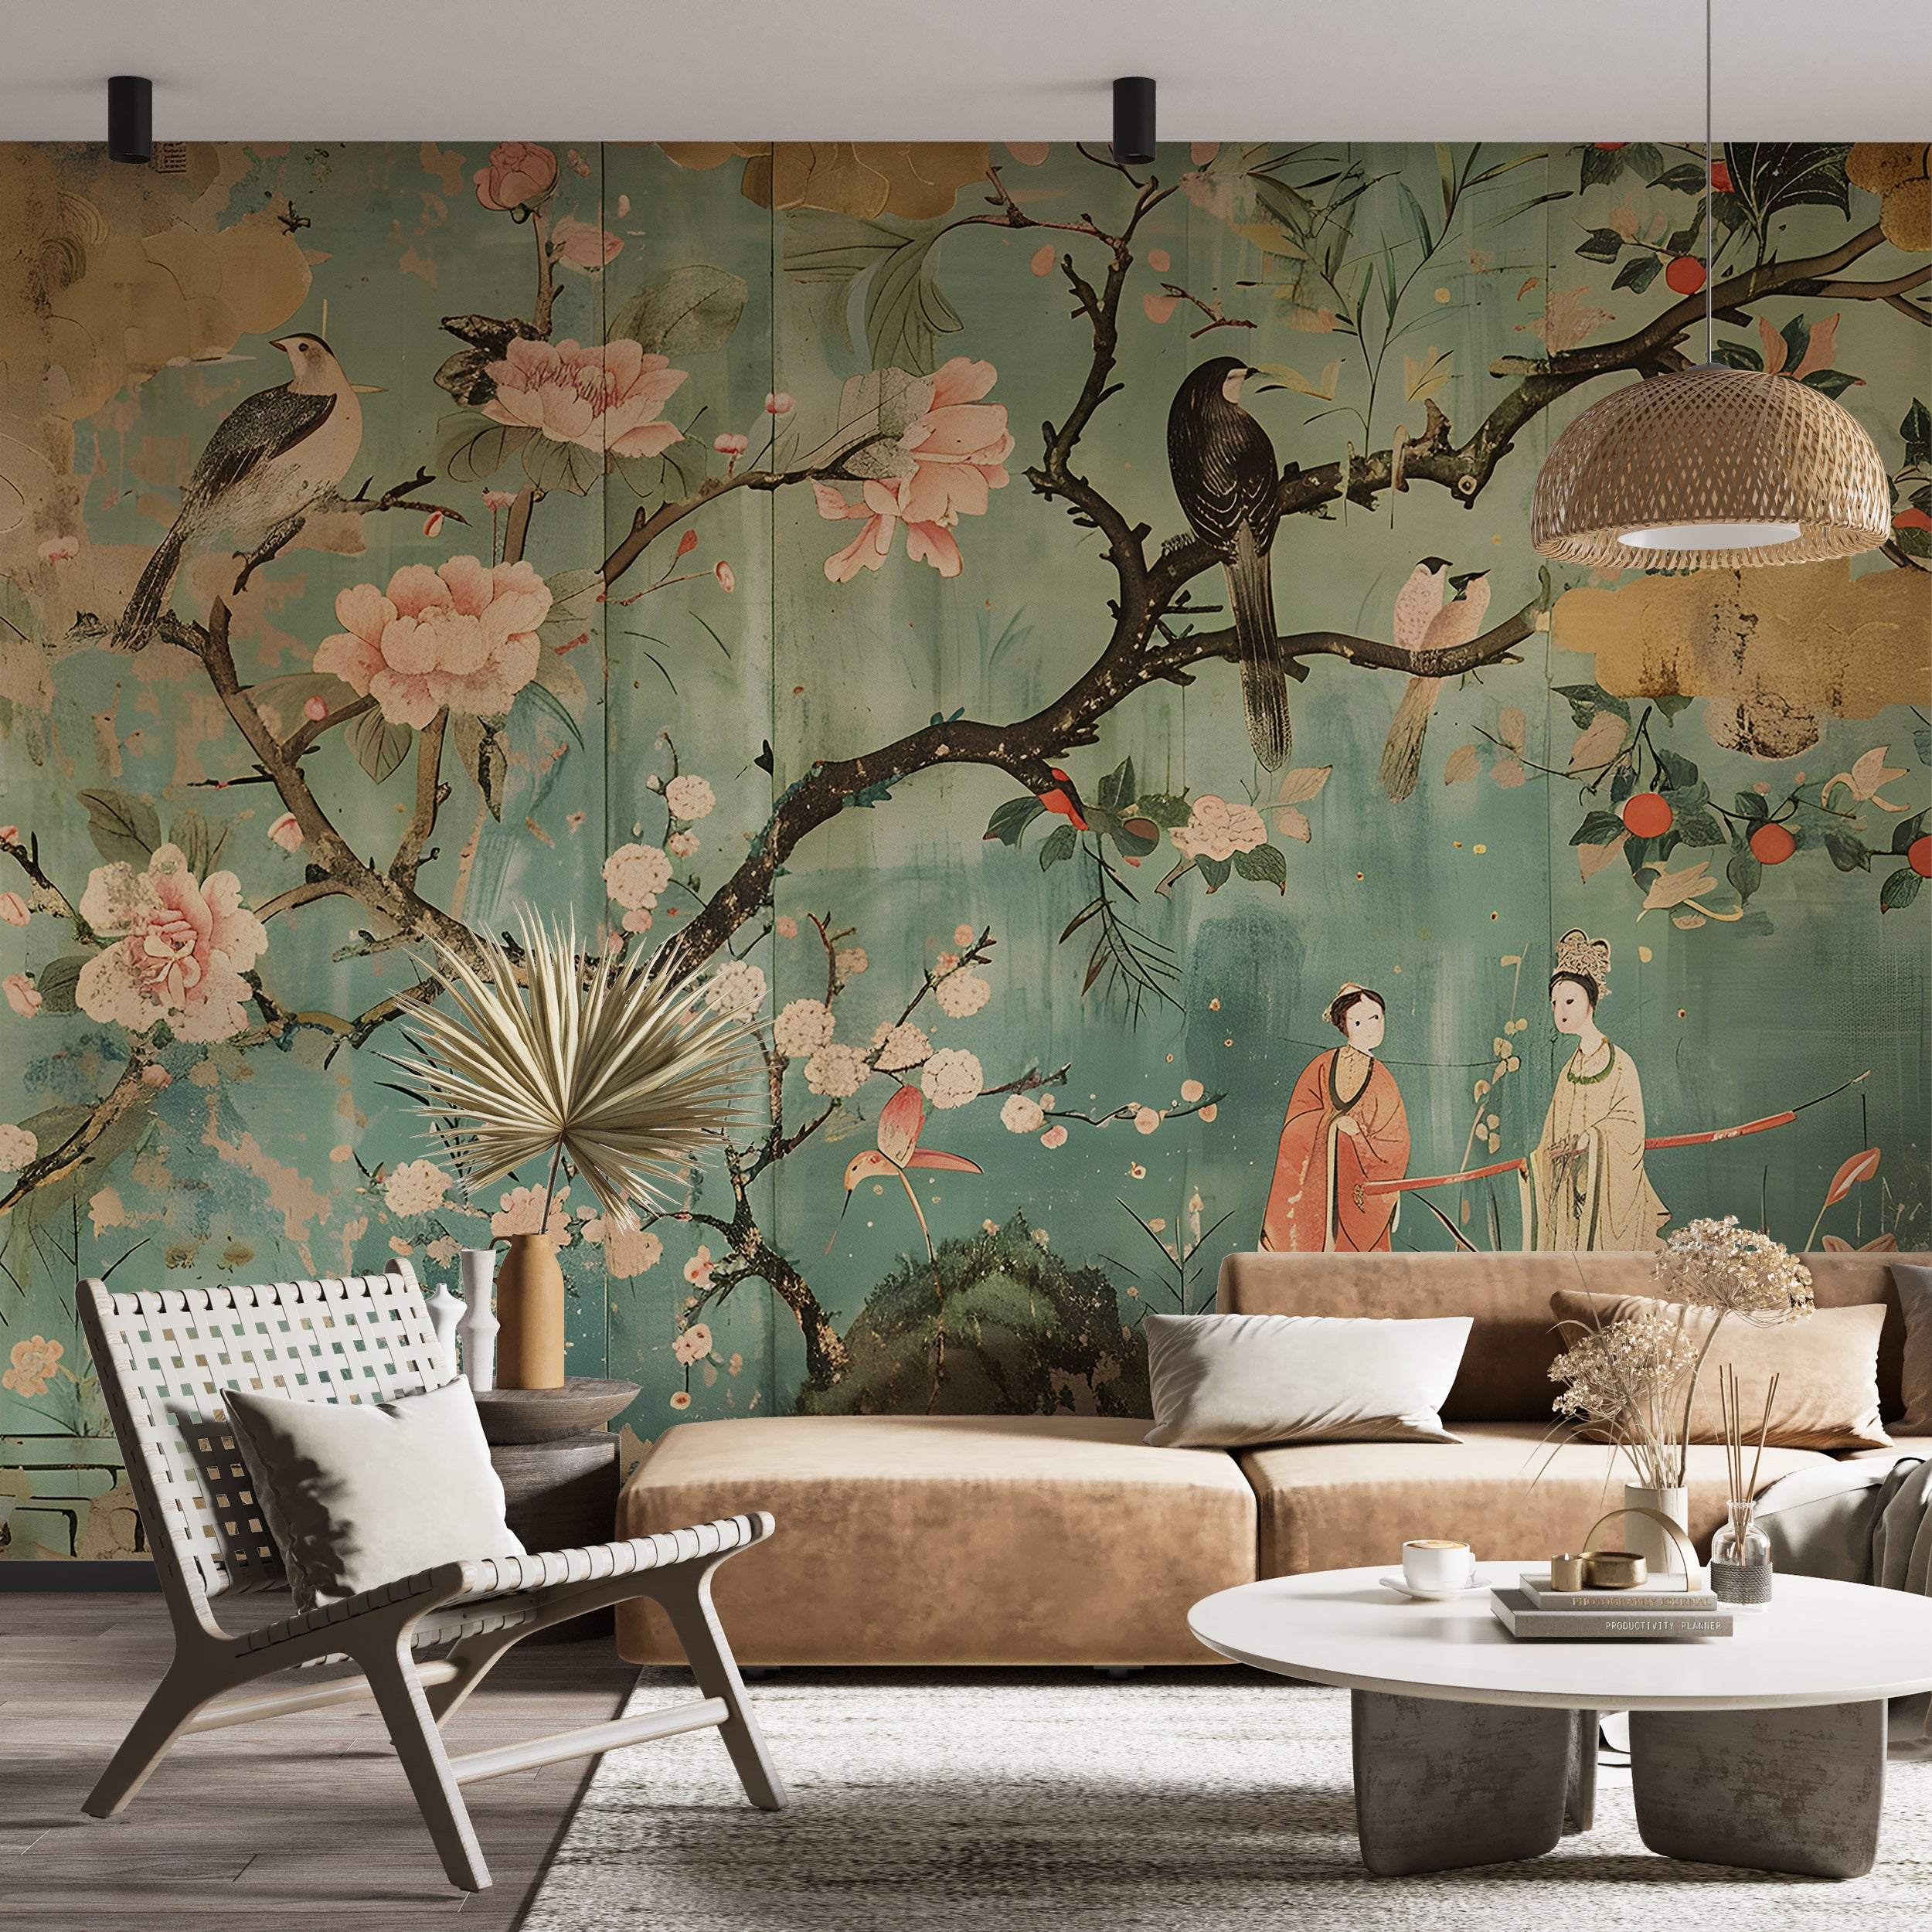 Traditional Japanese Floral Wallpaper Rustic Japanese Wall Decal